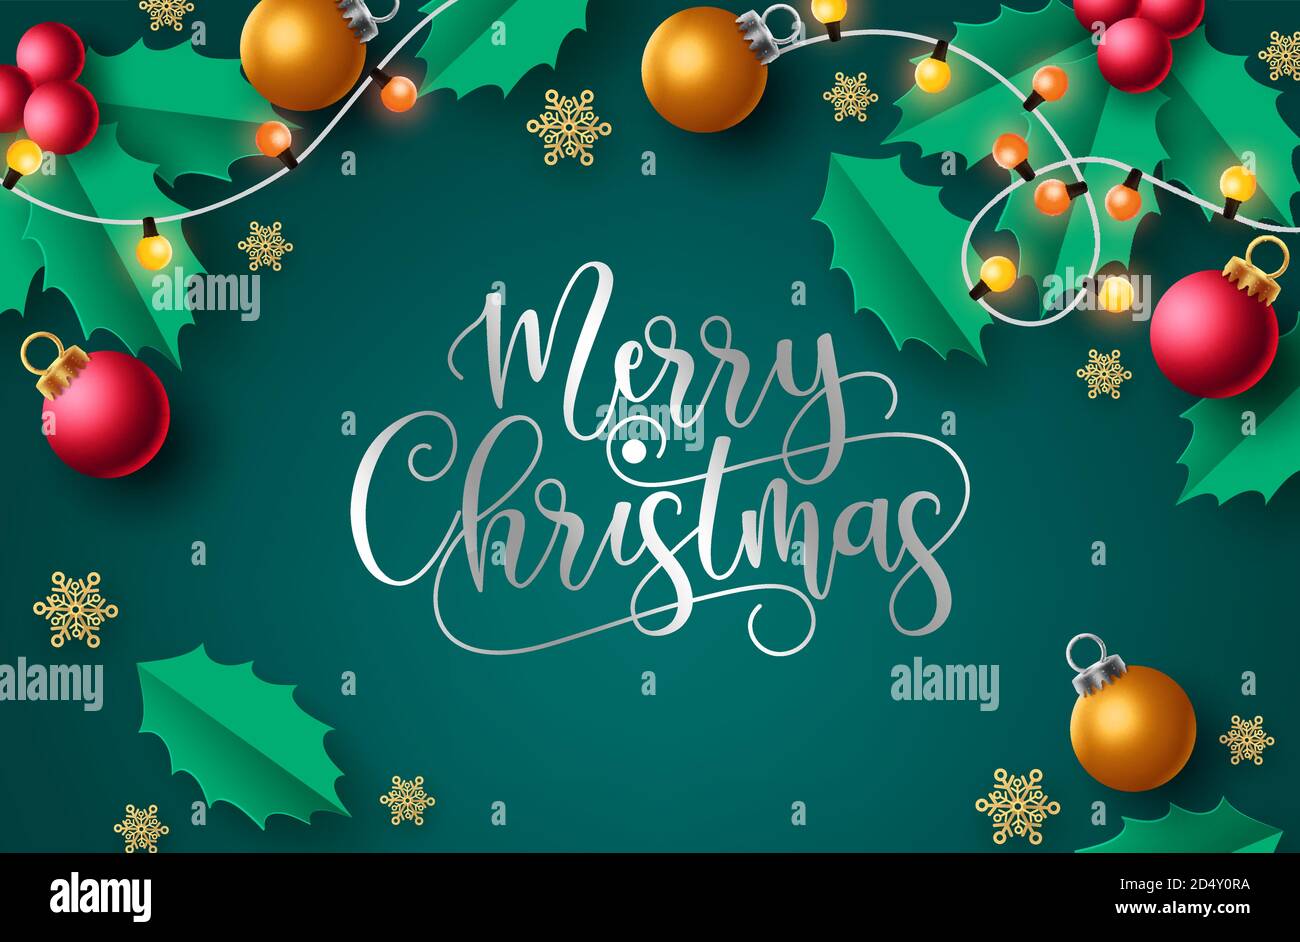 Merry christmas vector background design. Merry christmas greeting text in  green background with xmas elements like xmas light, balls and snowflakes  Stock Vector Image & Art - Alamy